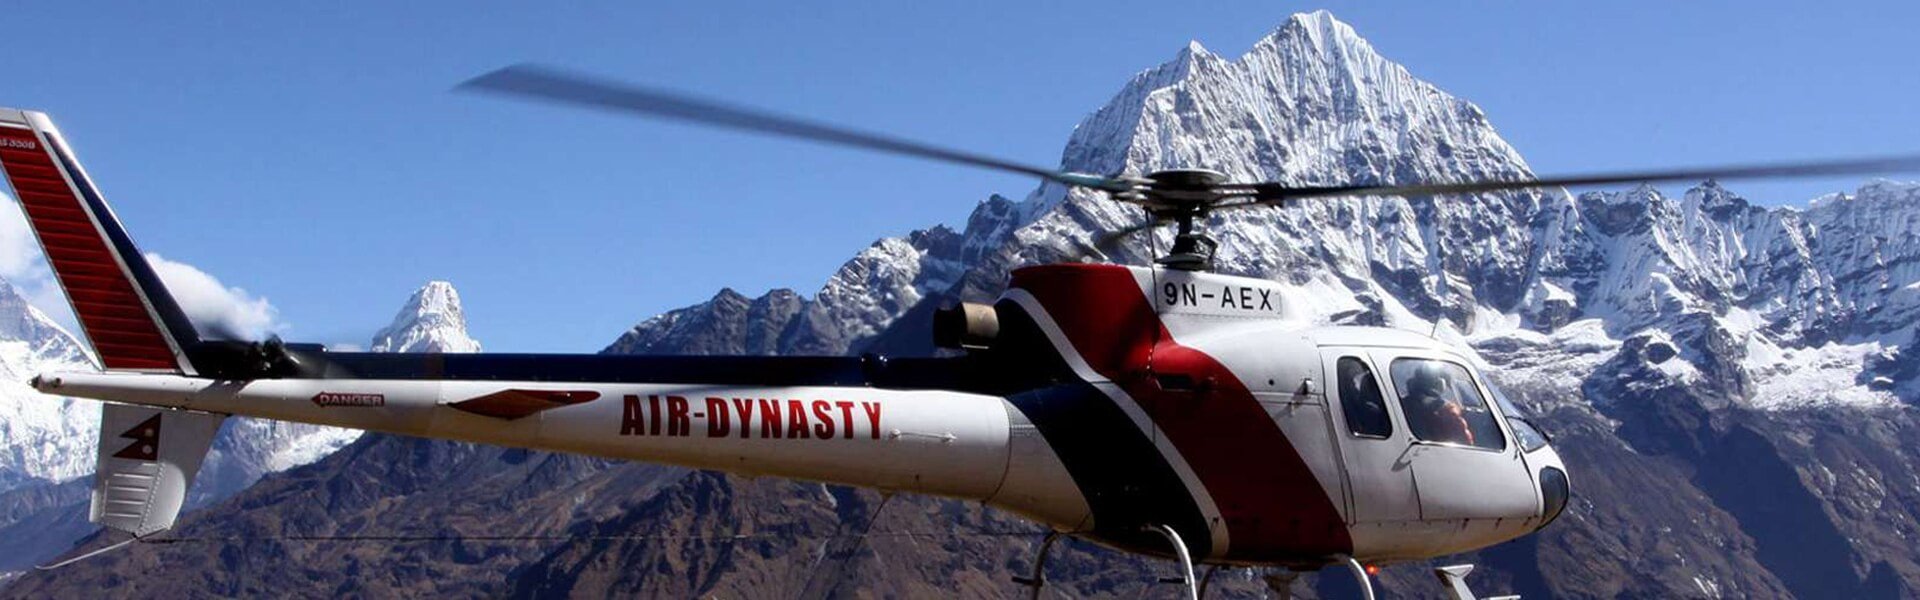 The Real Adventure of Helicopter Tour to Everest Base Camp